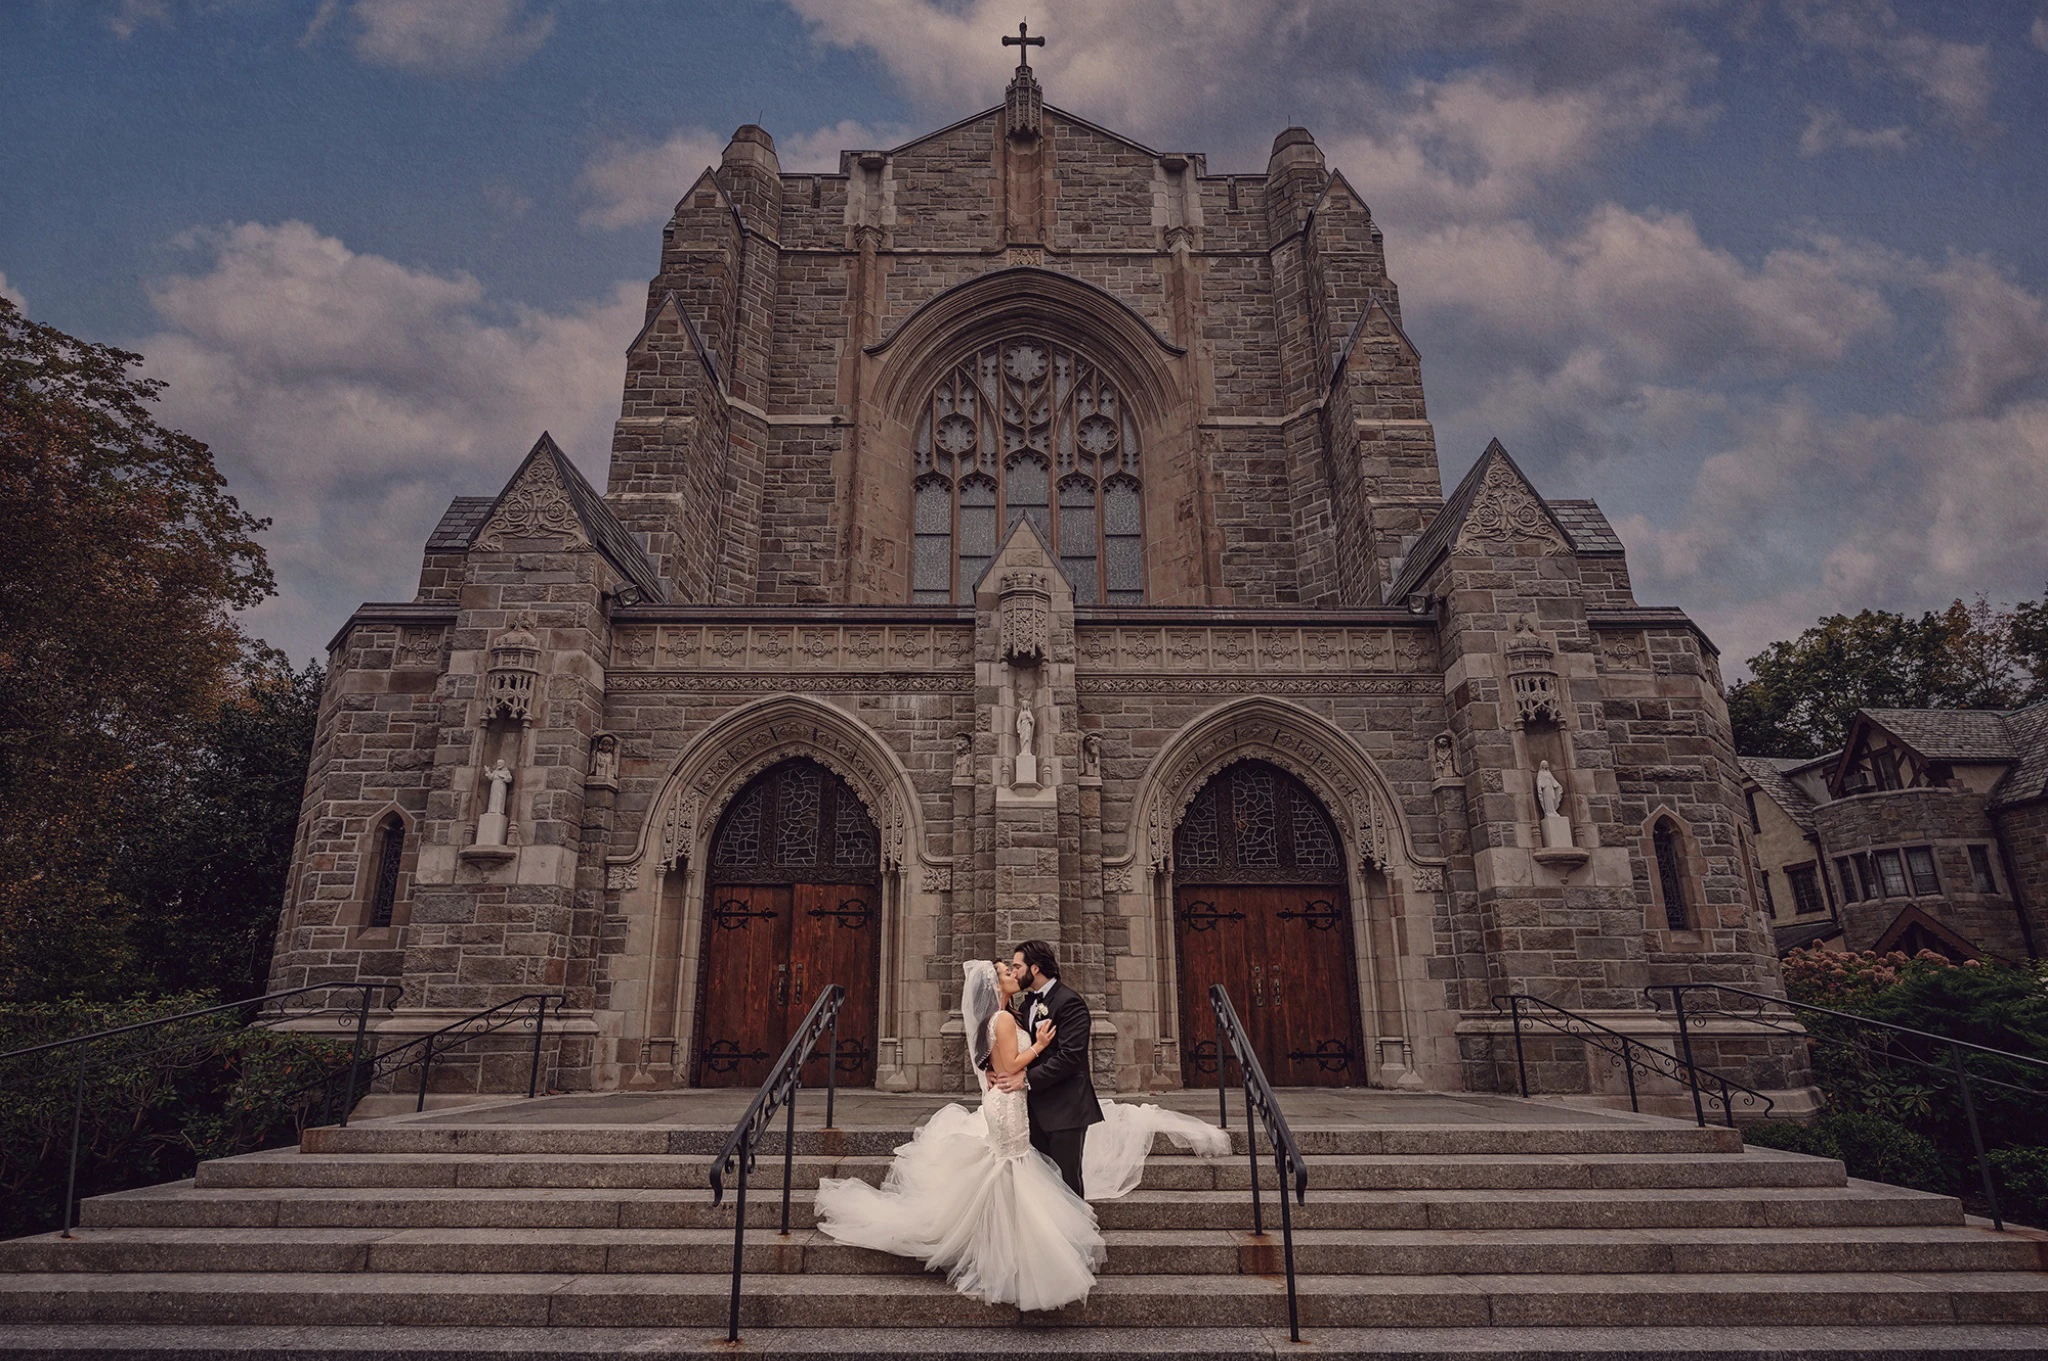 wedding photo of bride and groom at Rye, NY wedding standing in front of church